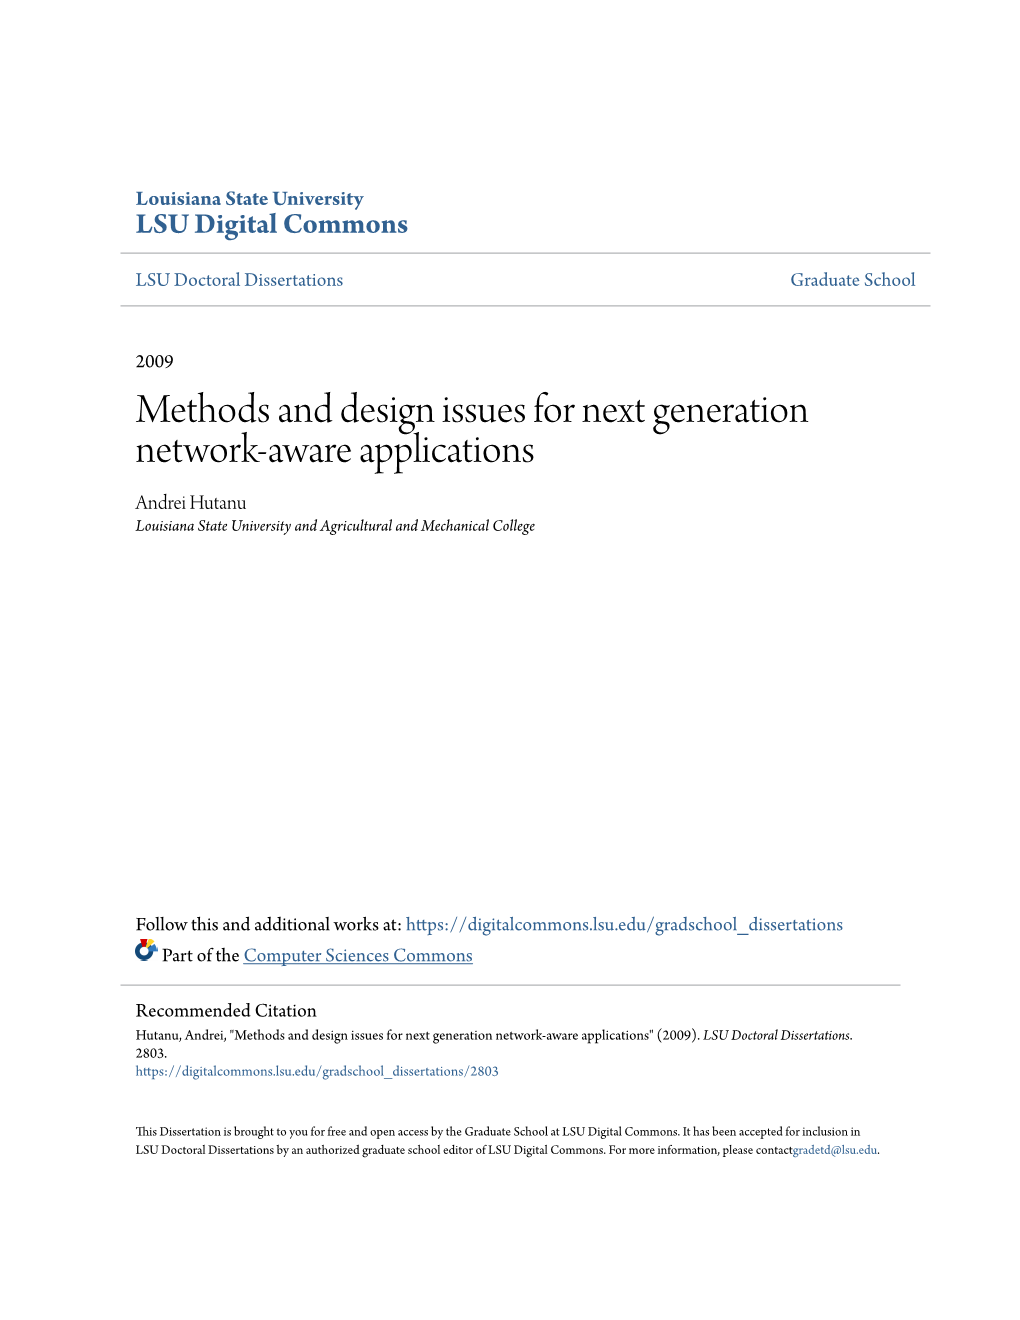 Methods and Design Issues for Next Generation Network-Aware Applications Andrei Hutanu Louisiana State University and Agricultural and Mechanical College